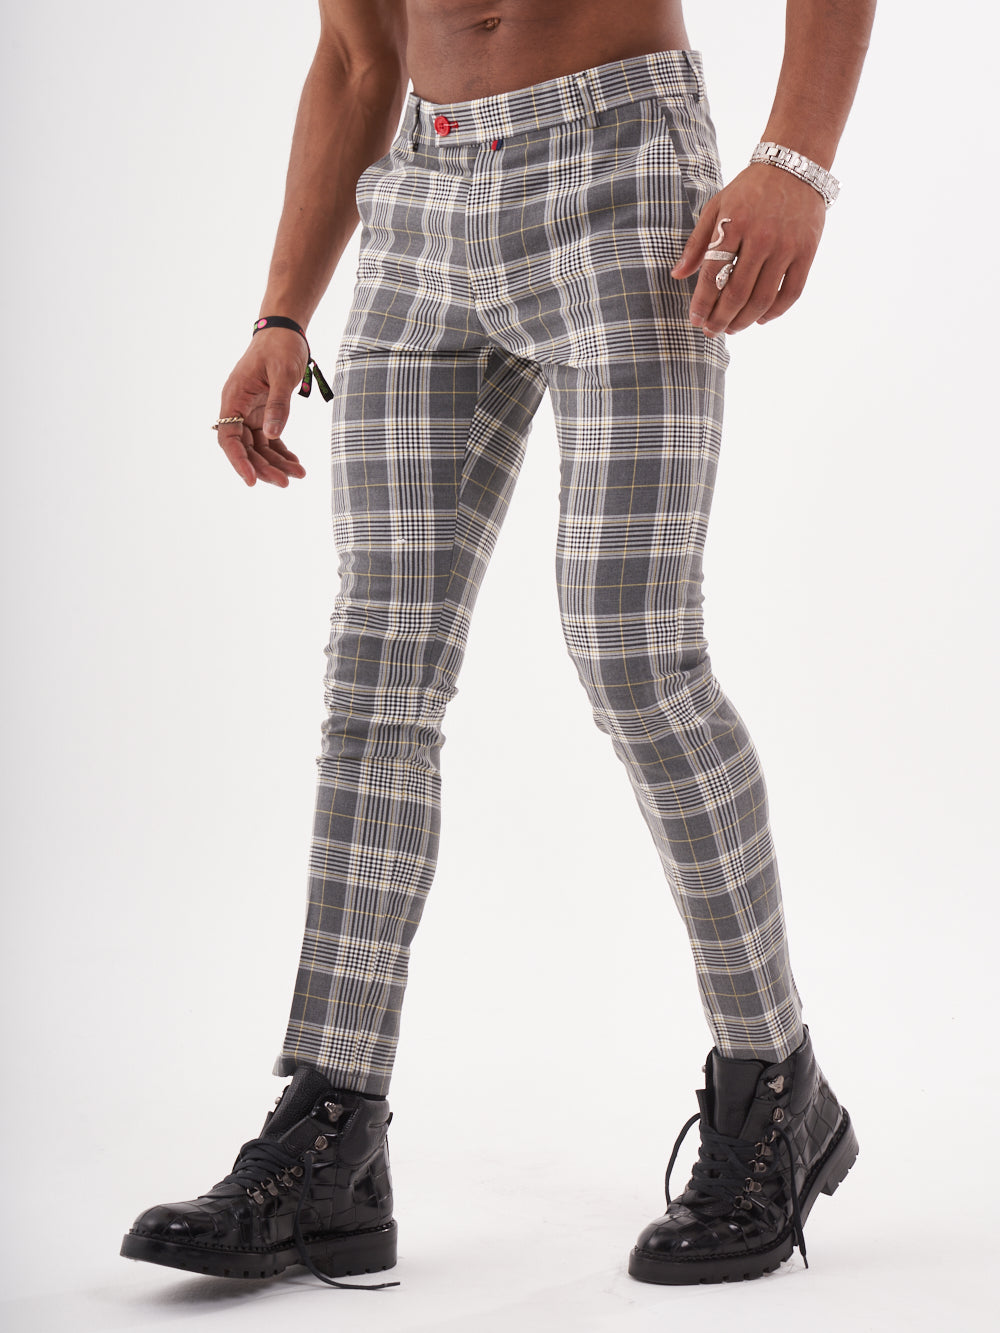 A man wearing CHECKMATE PANTS